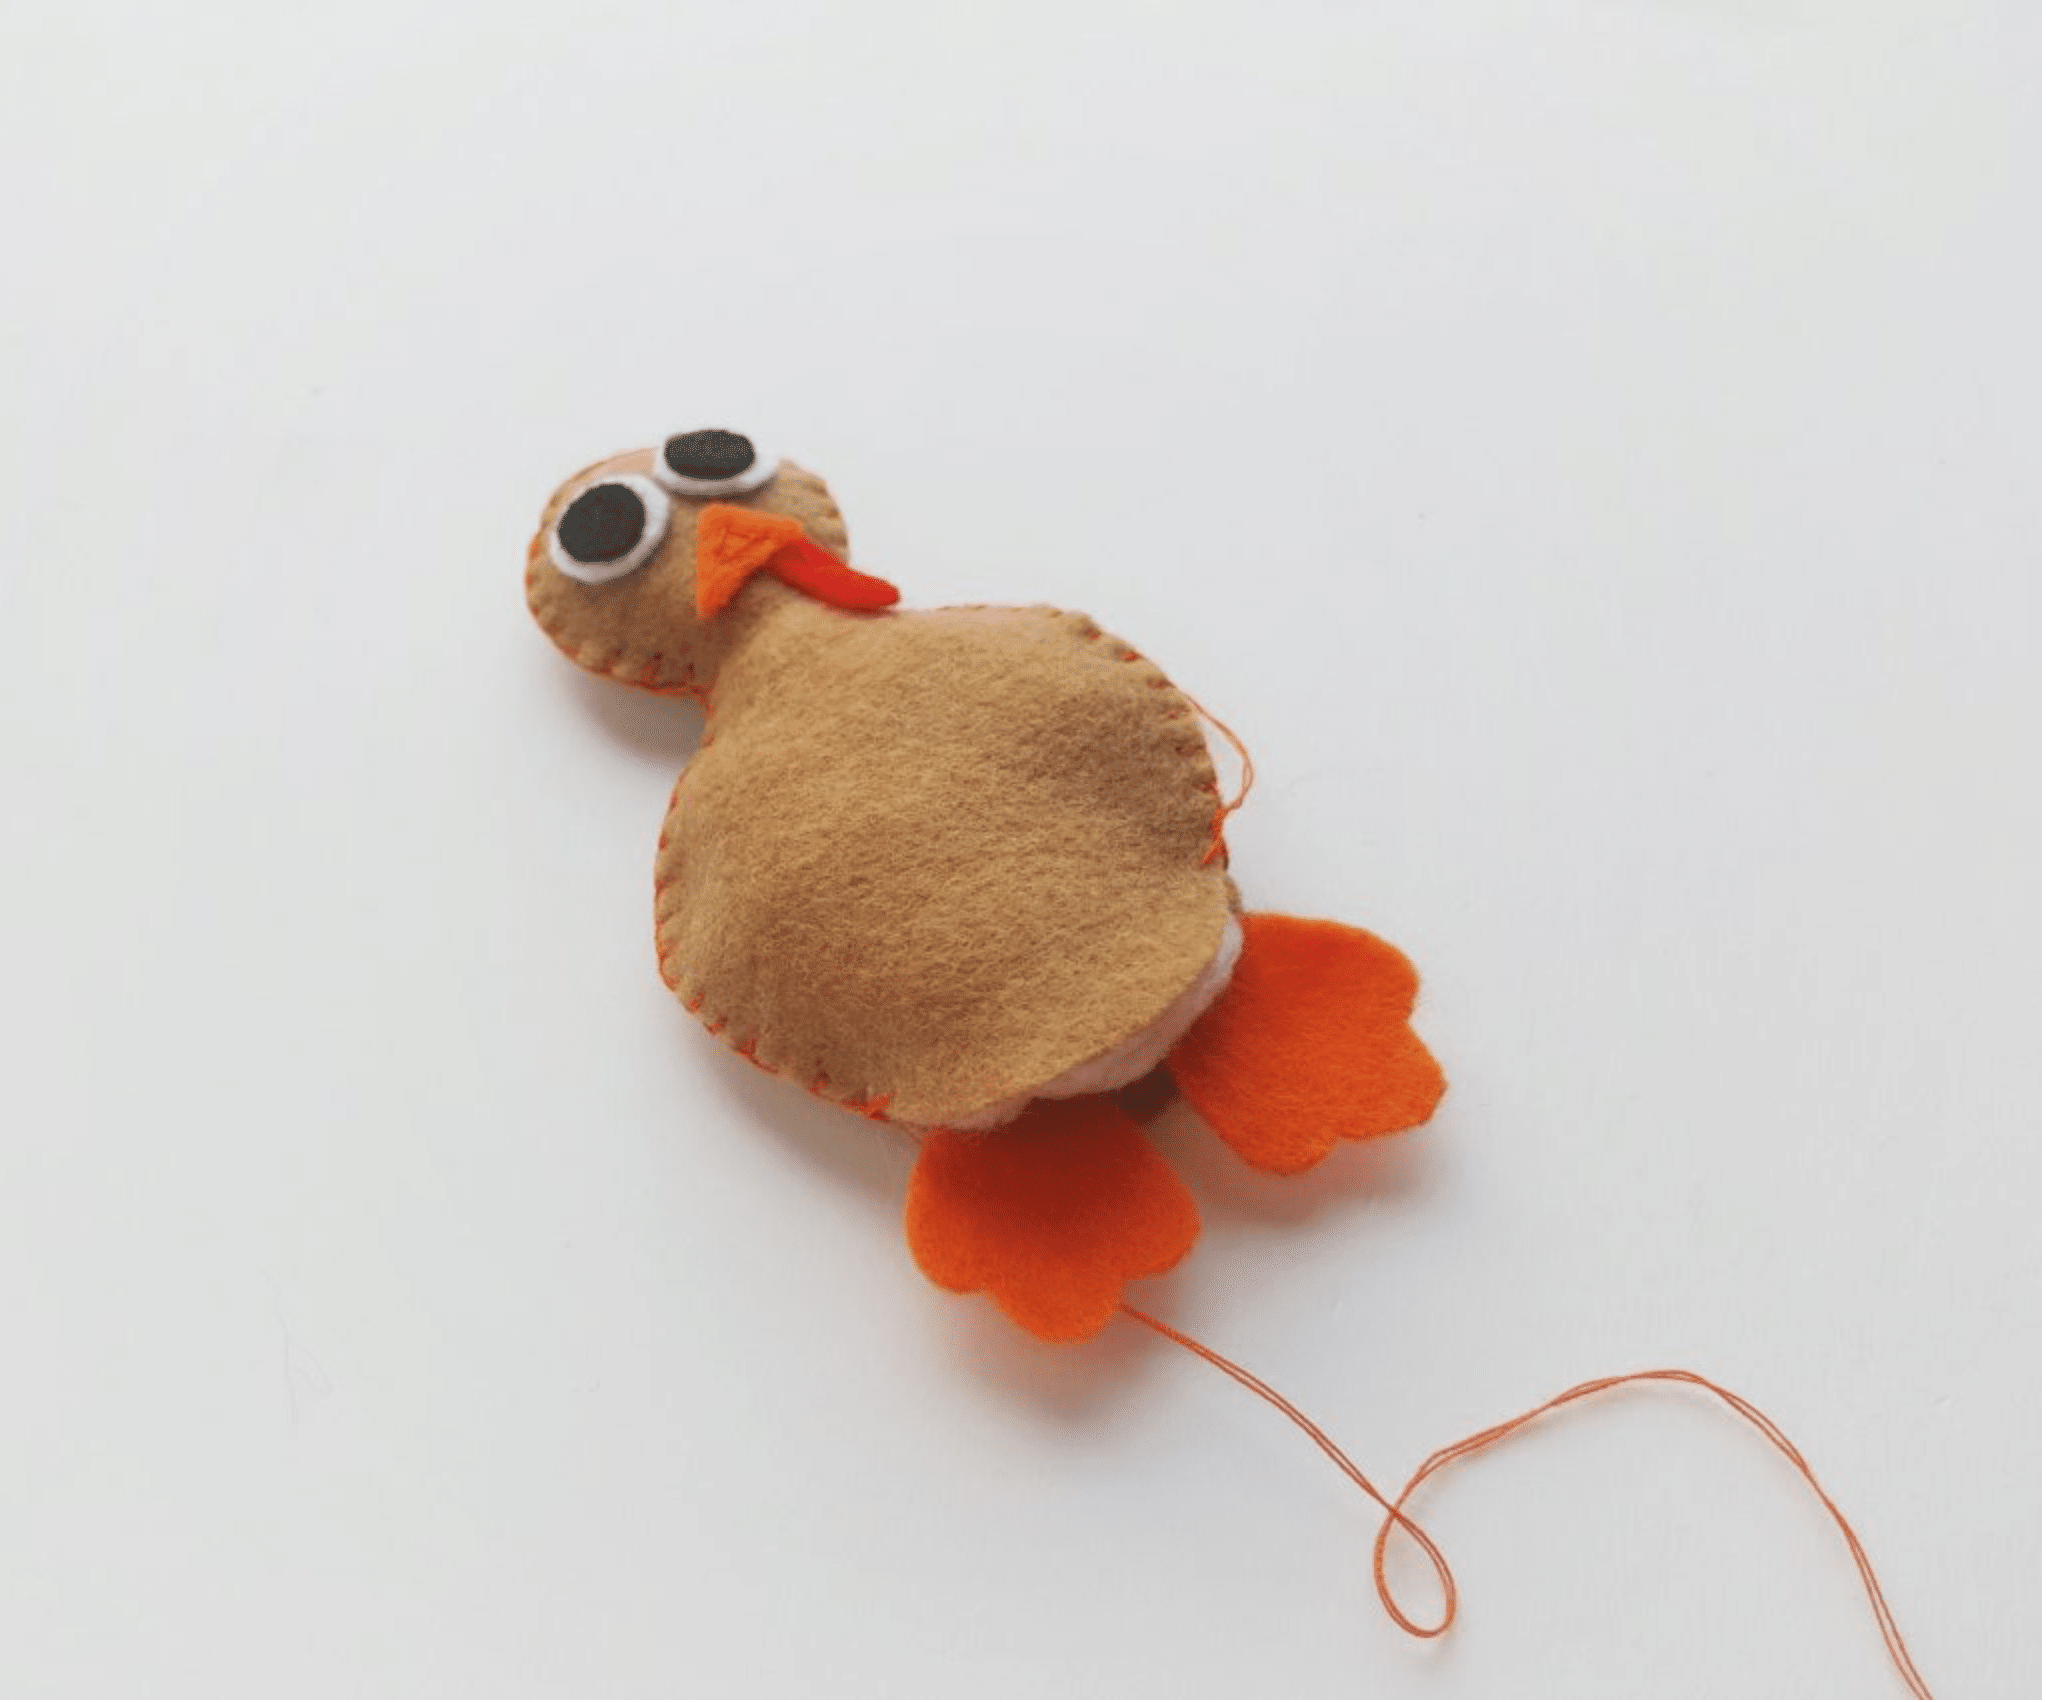 A handmade felt turkey craft with orange stitched details and googly eyes, positioned on a white background with some loose thread visible.